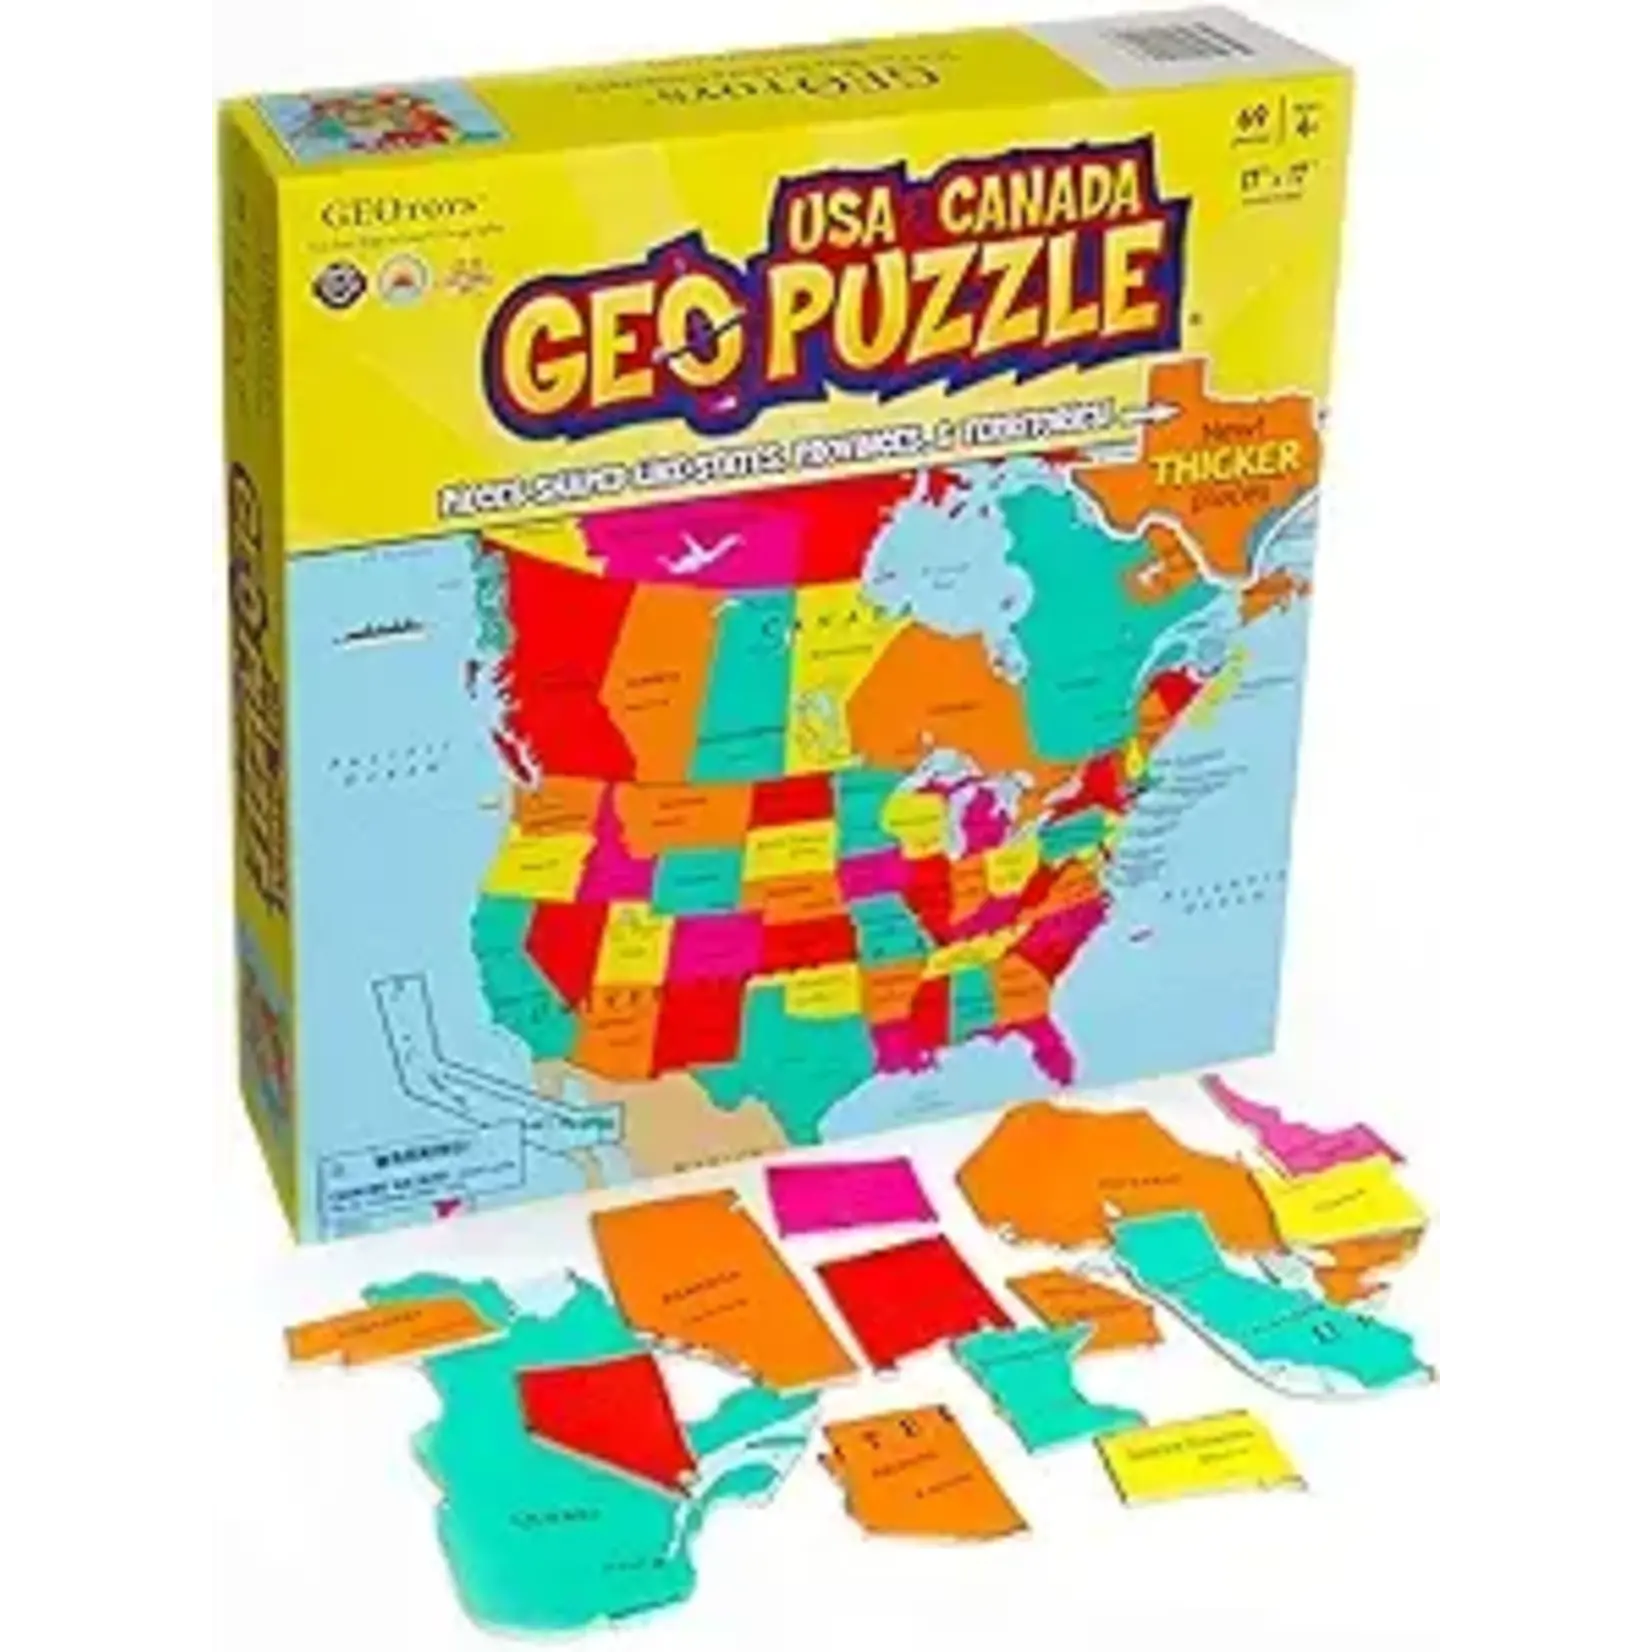 Geotoys GeoPuzzle: USA & Canada, 69-Piece Floor Puzzle